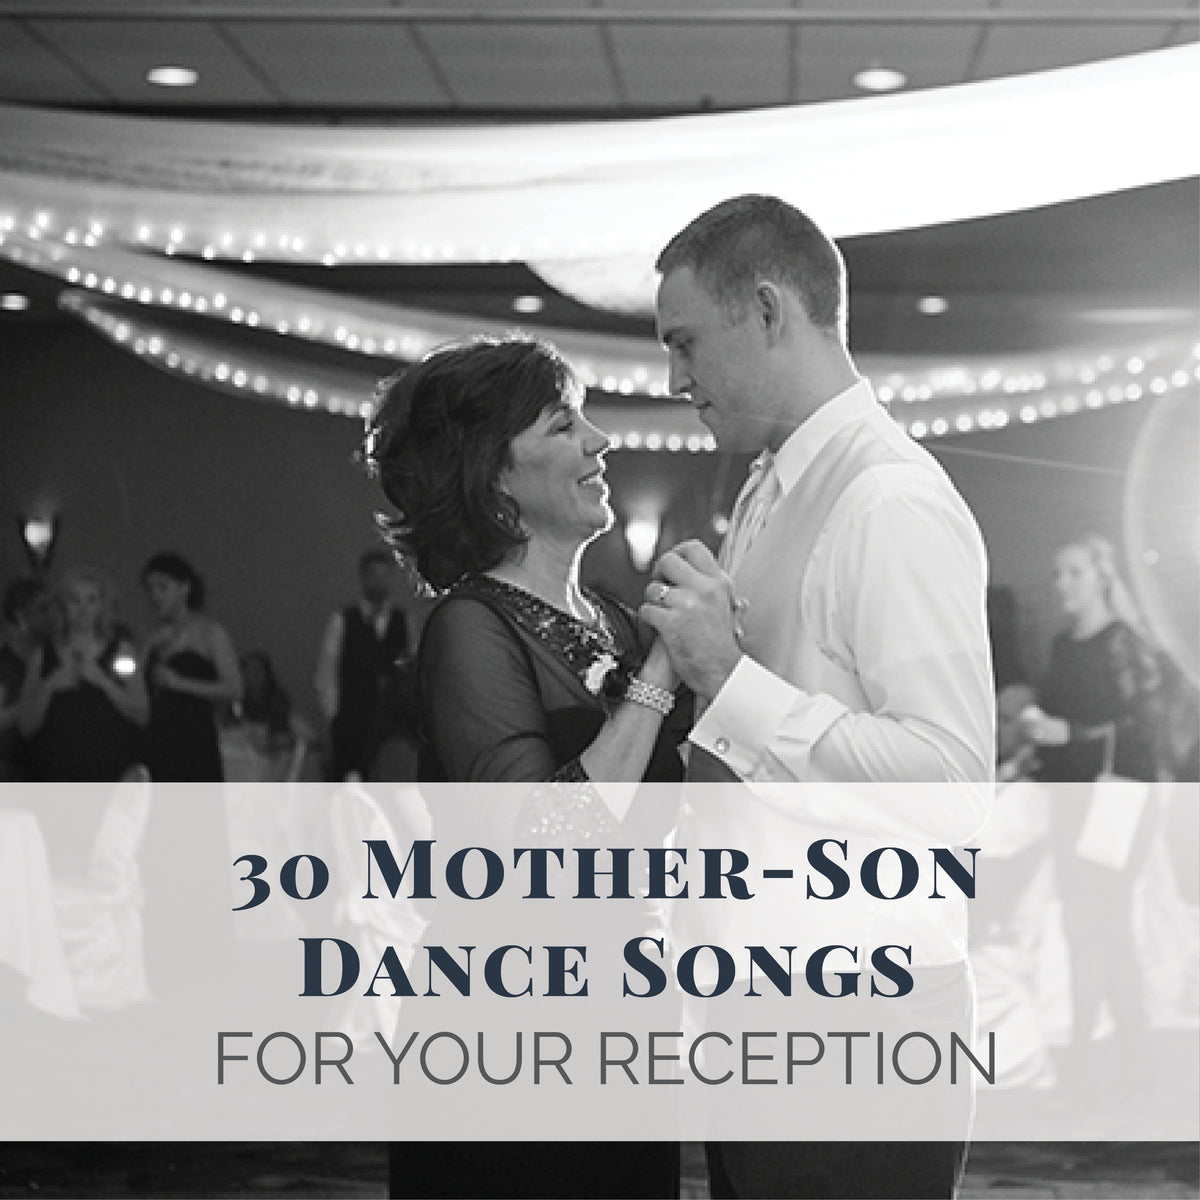 30 MotherSon Dance Songs for Your Wedding Reception Wedding Shoppe